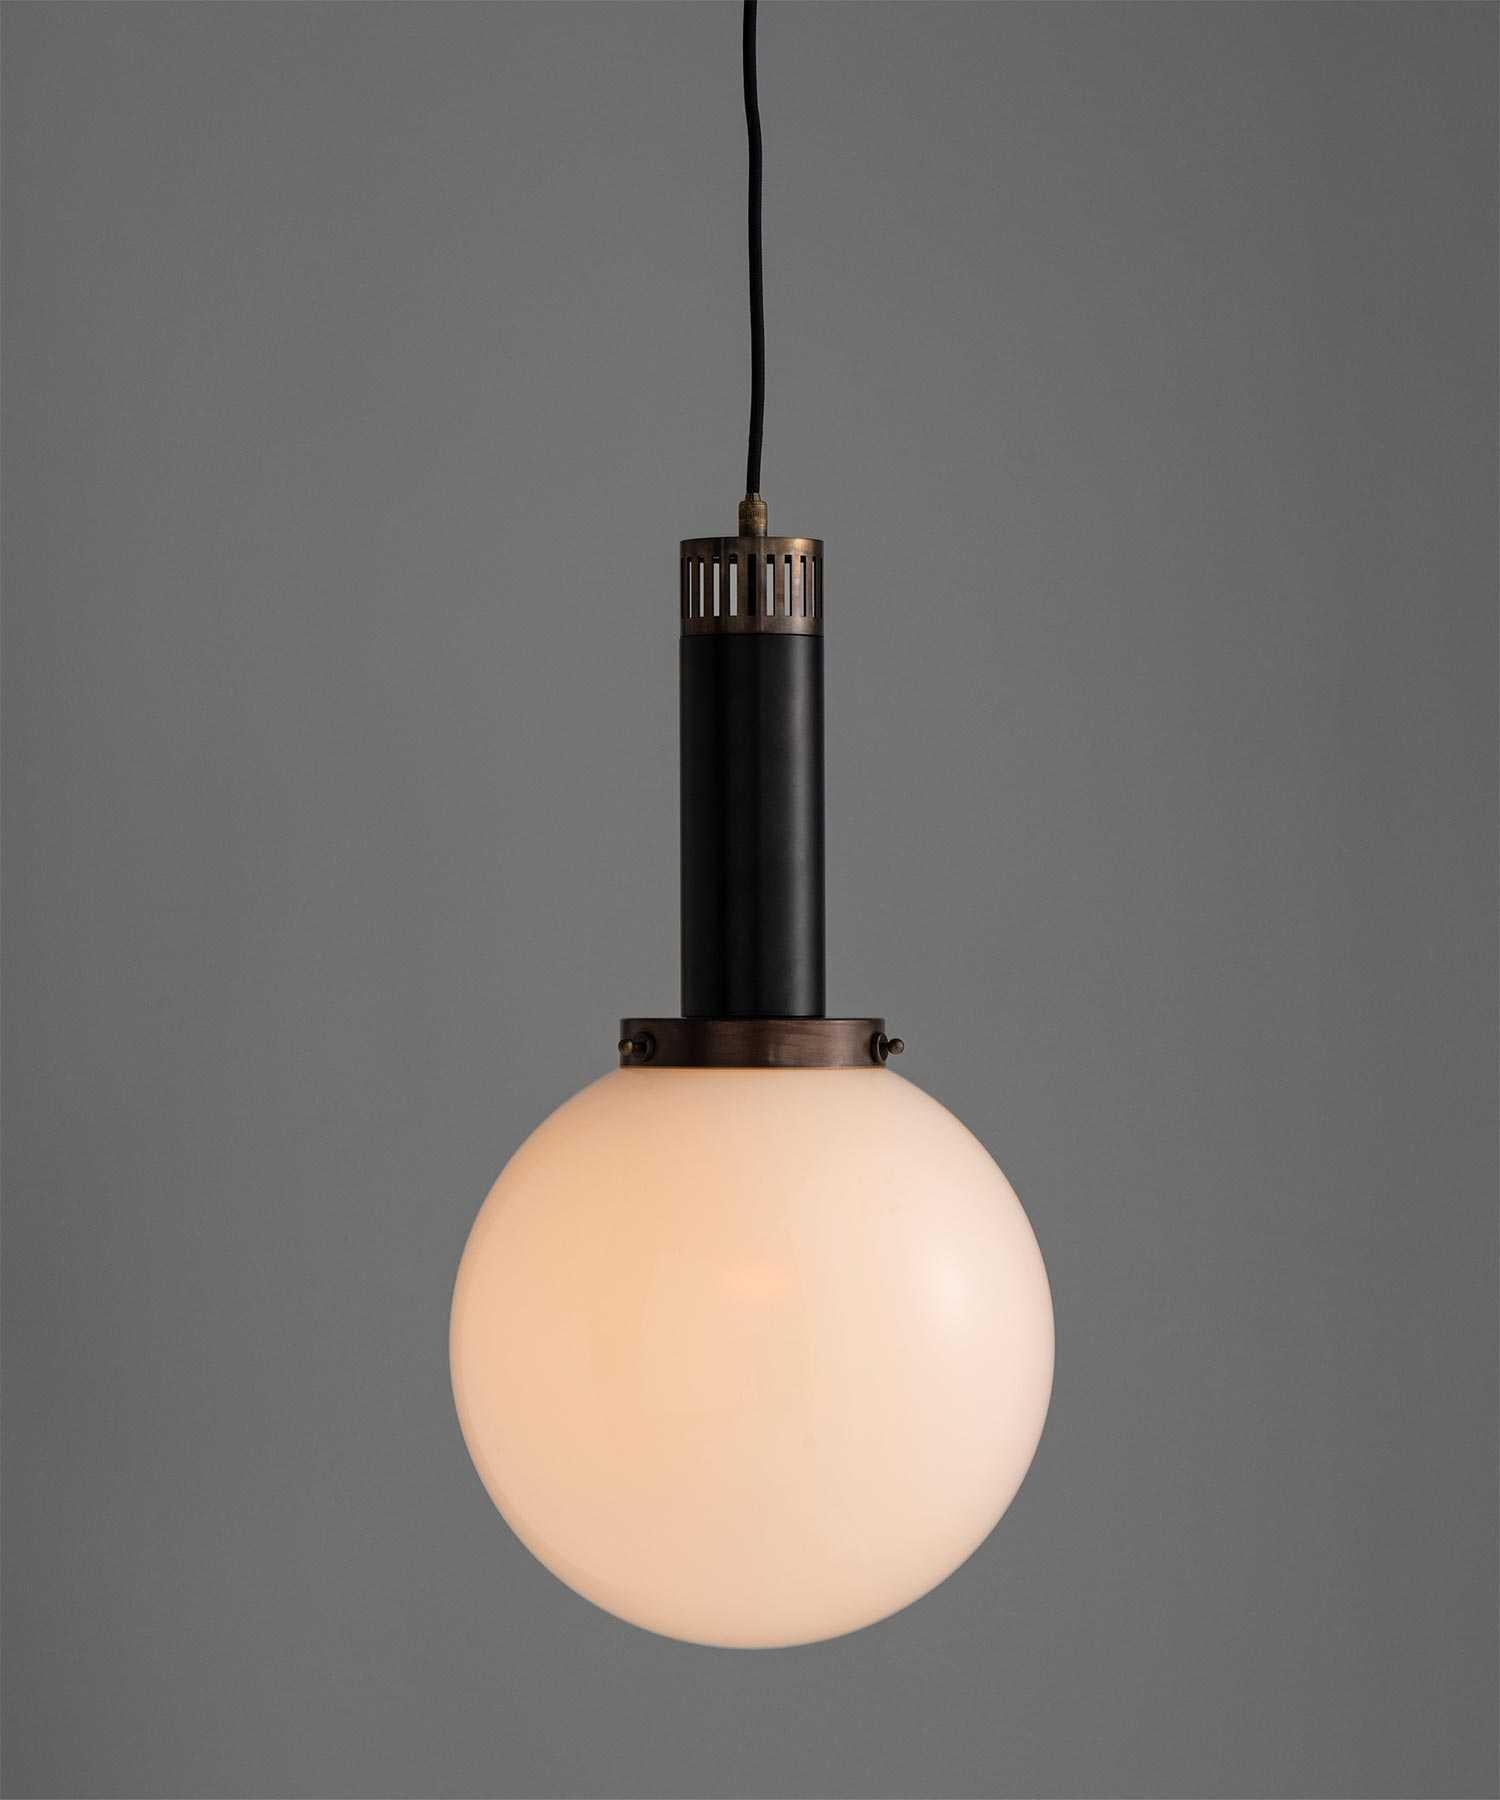 Black Metal & Opaline Globe Pendant
Made in Italy
Brass fittings with black enamel fitter and opaline glass shade.
10.5